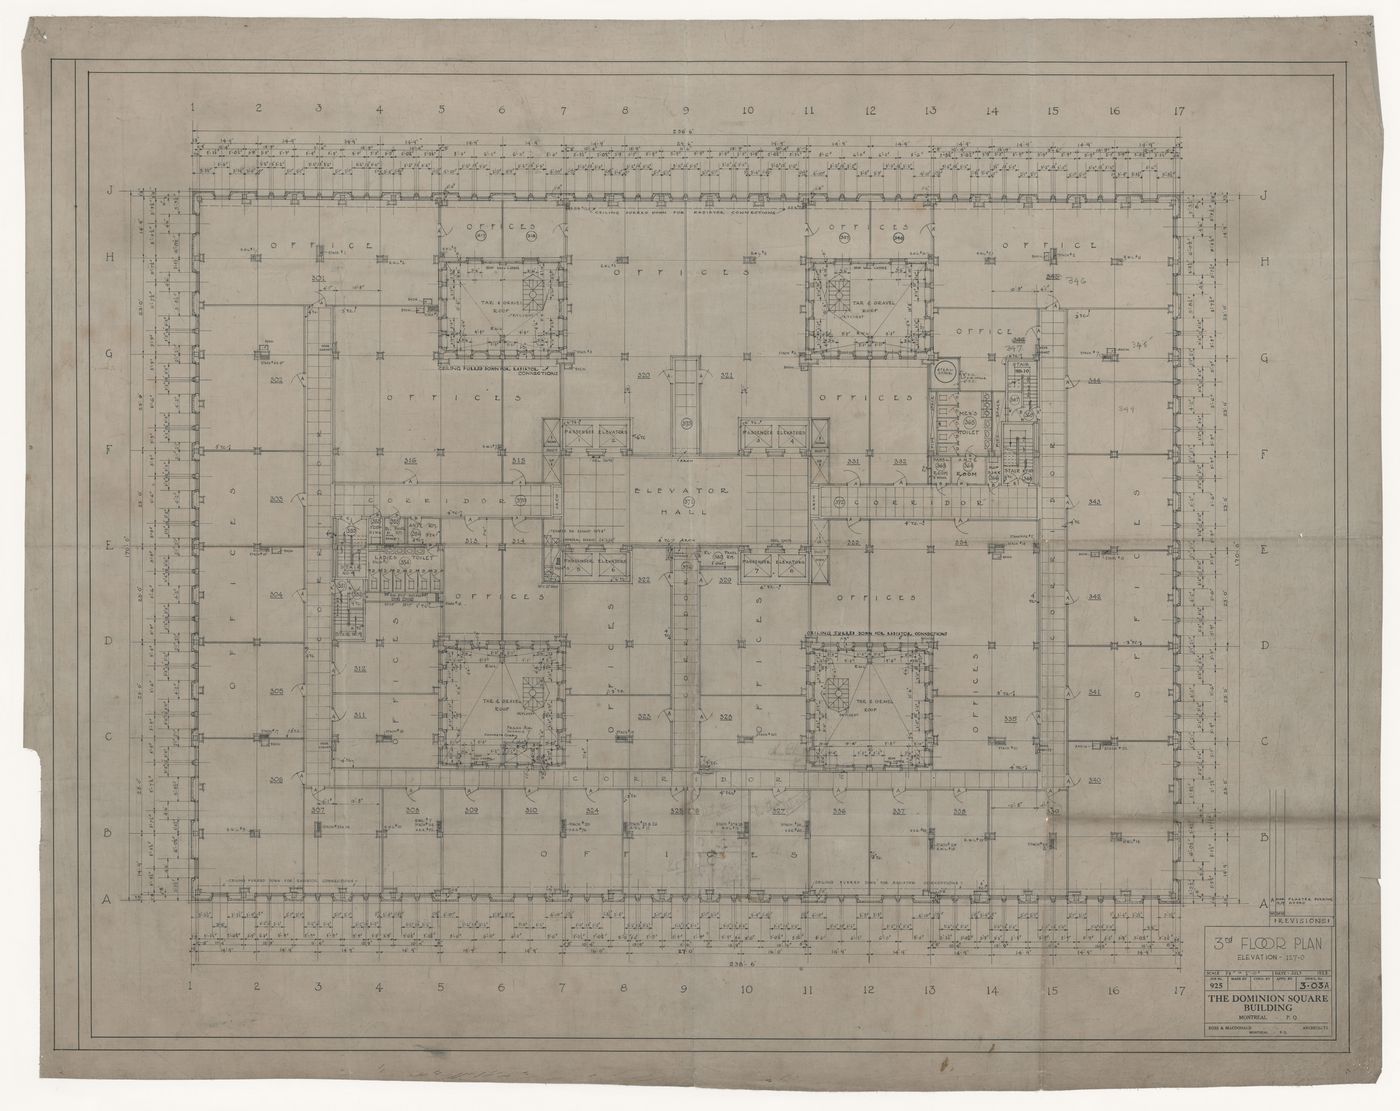 Third floor plan for Dominion Square Building, Montreal, Québec